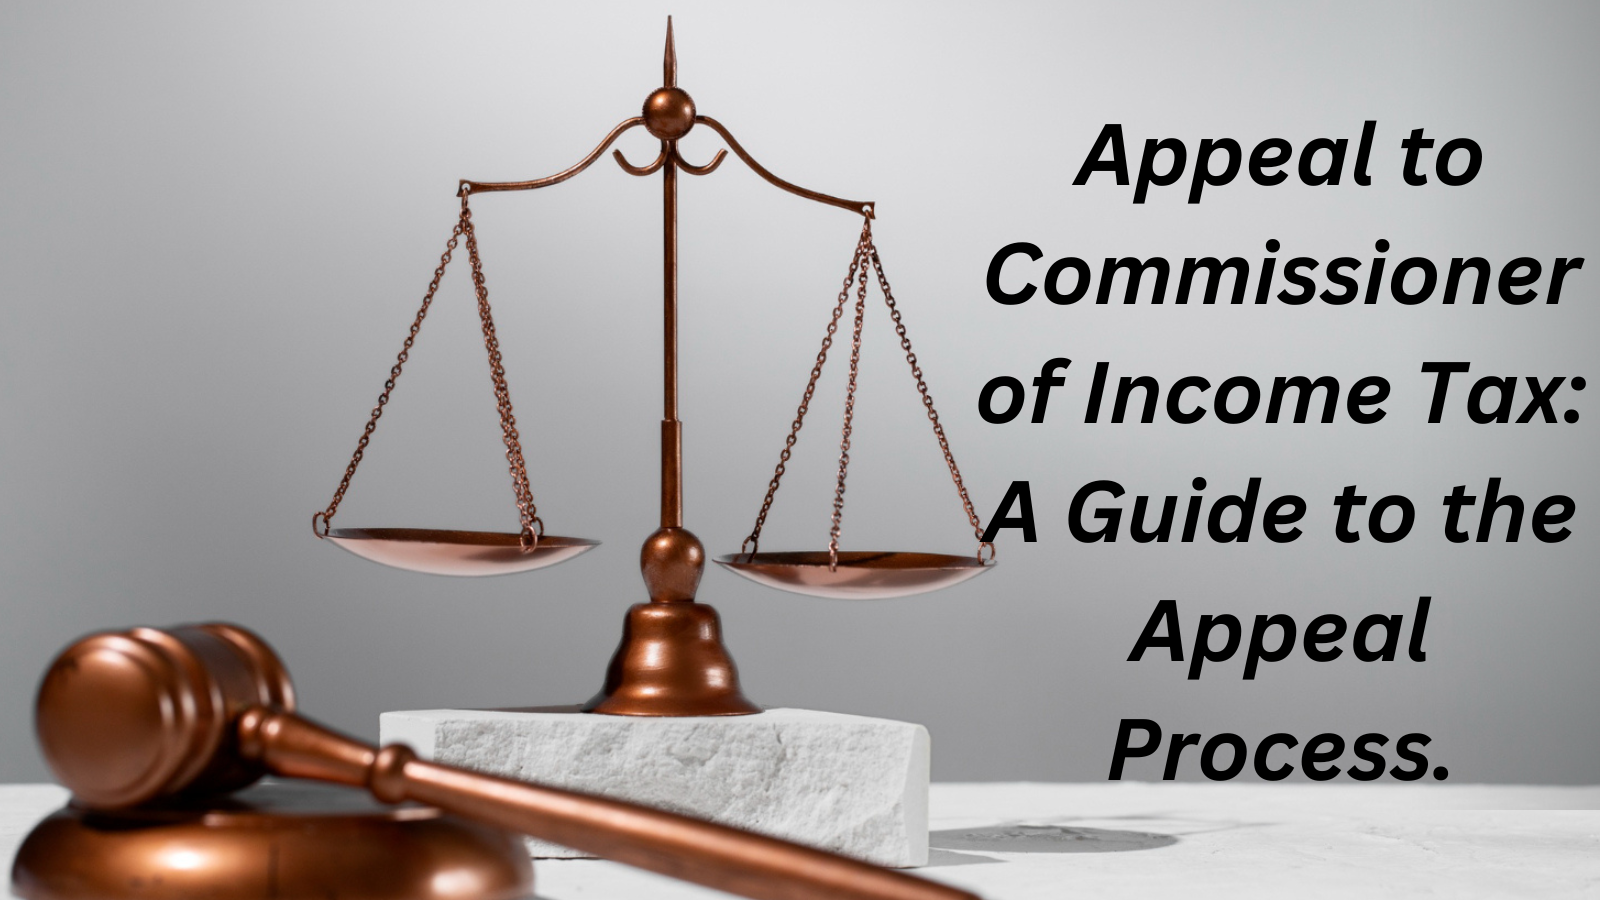 Appeal to Commissioner of Income Tax